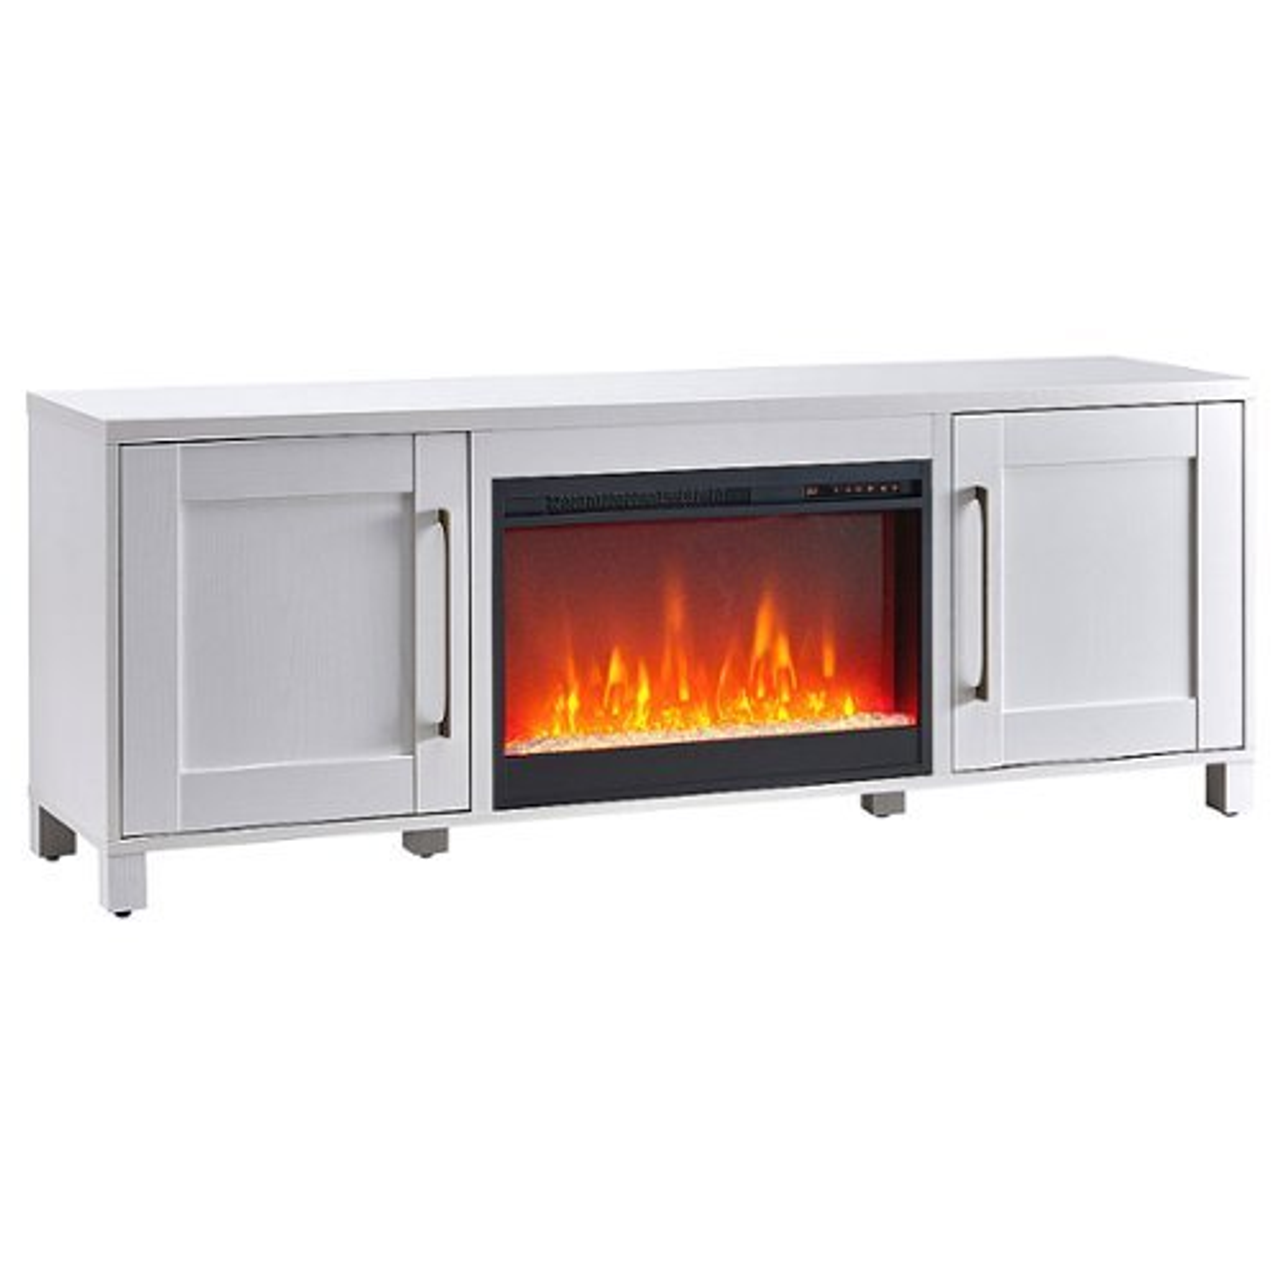 Camden&Wells - Chabot Crystal Fireplace TV Stand for TVs up to 80" - White